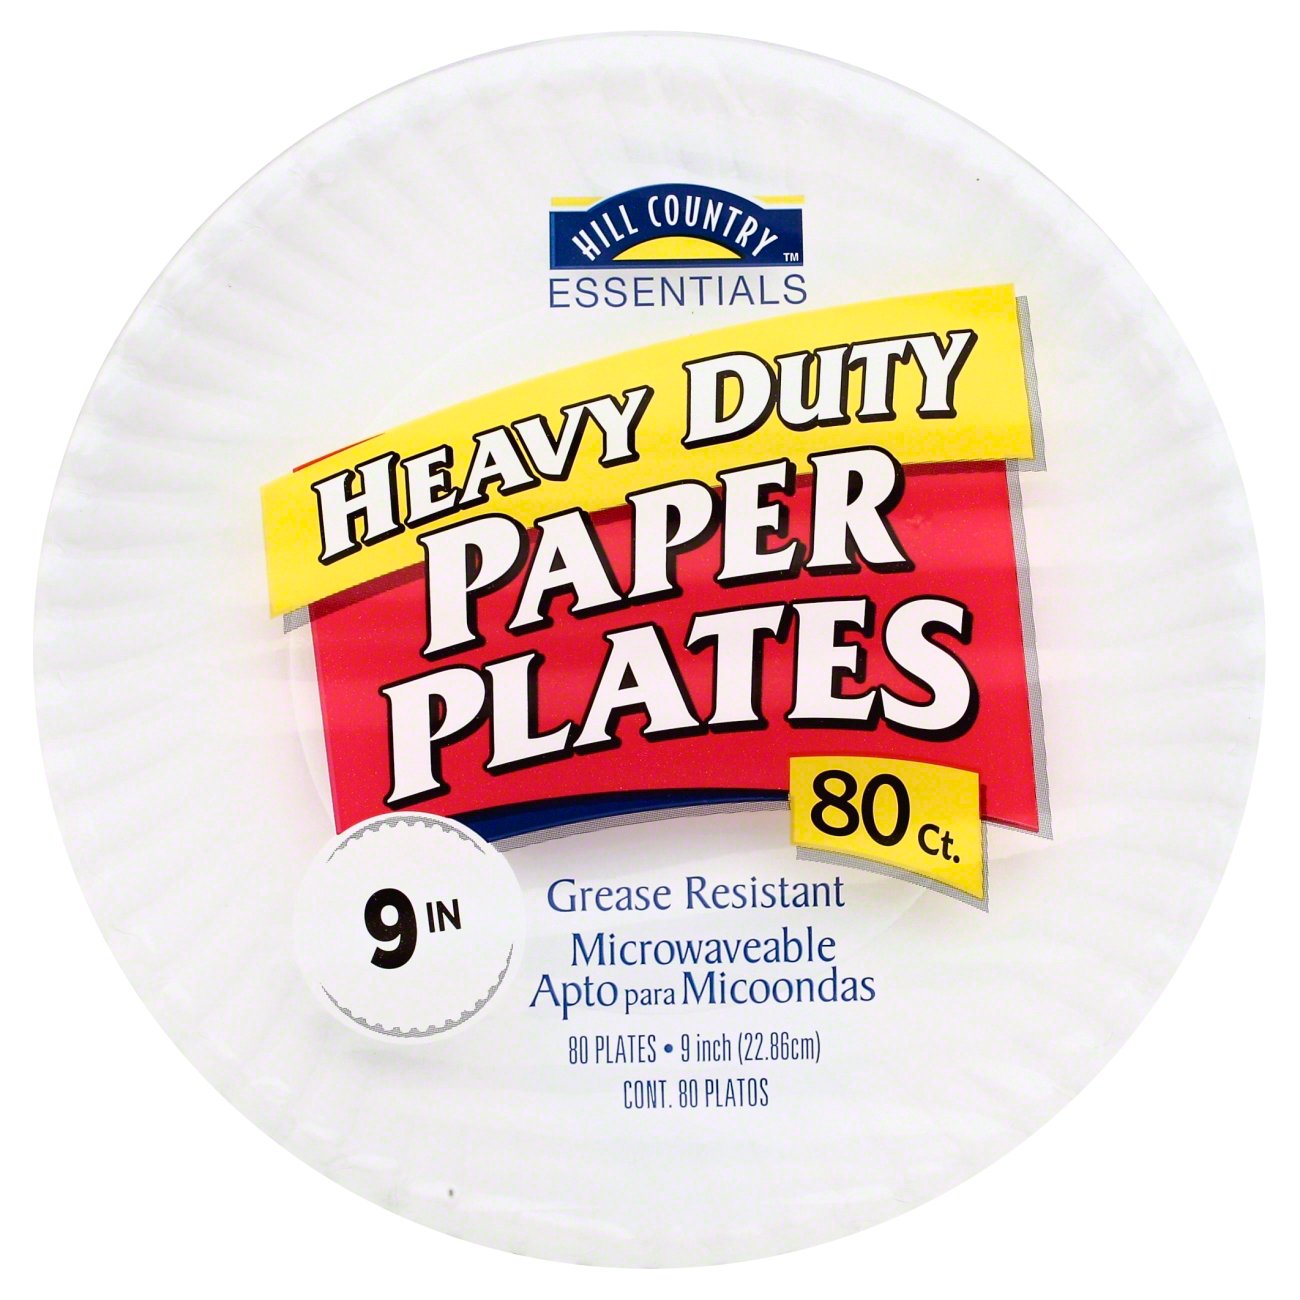 Hill Country Essentials 9 in Heavy Duty Paper Plates - Shop Plates